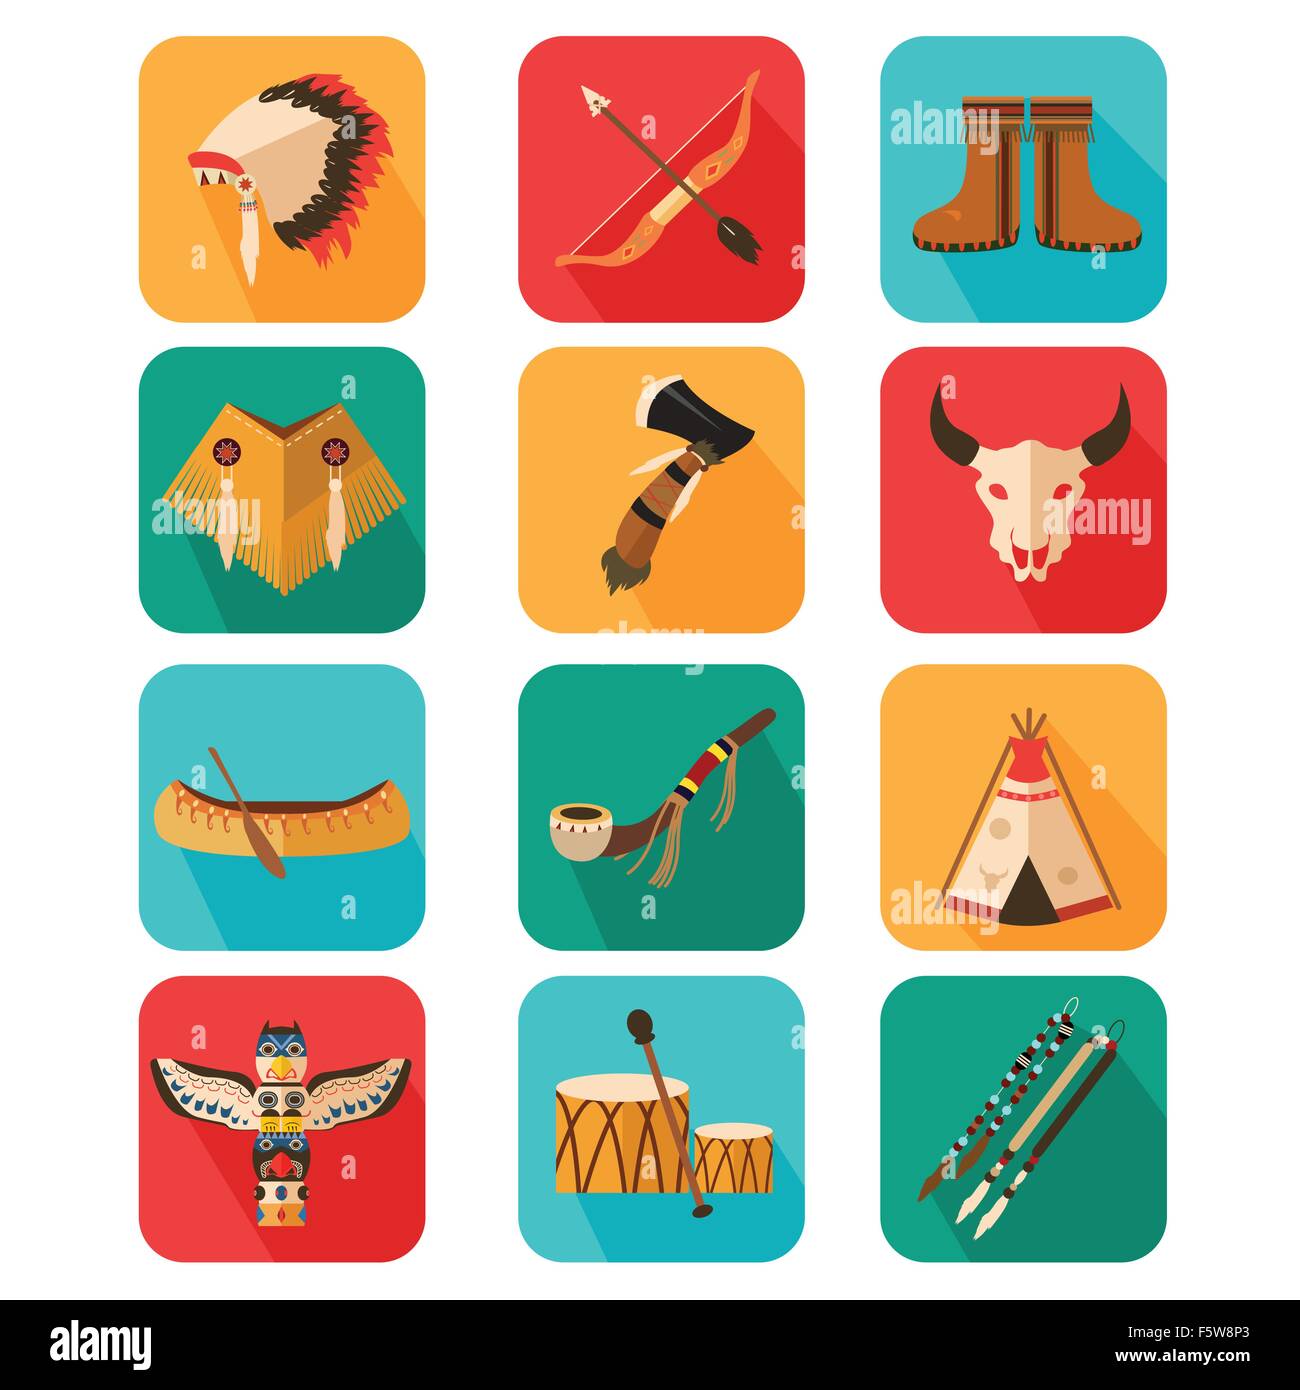 A vector illustration of Native Americans icon sets Stock Vector